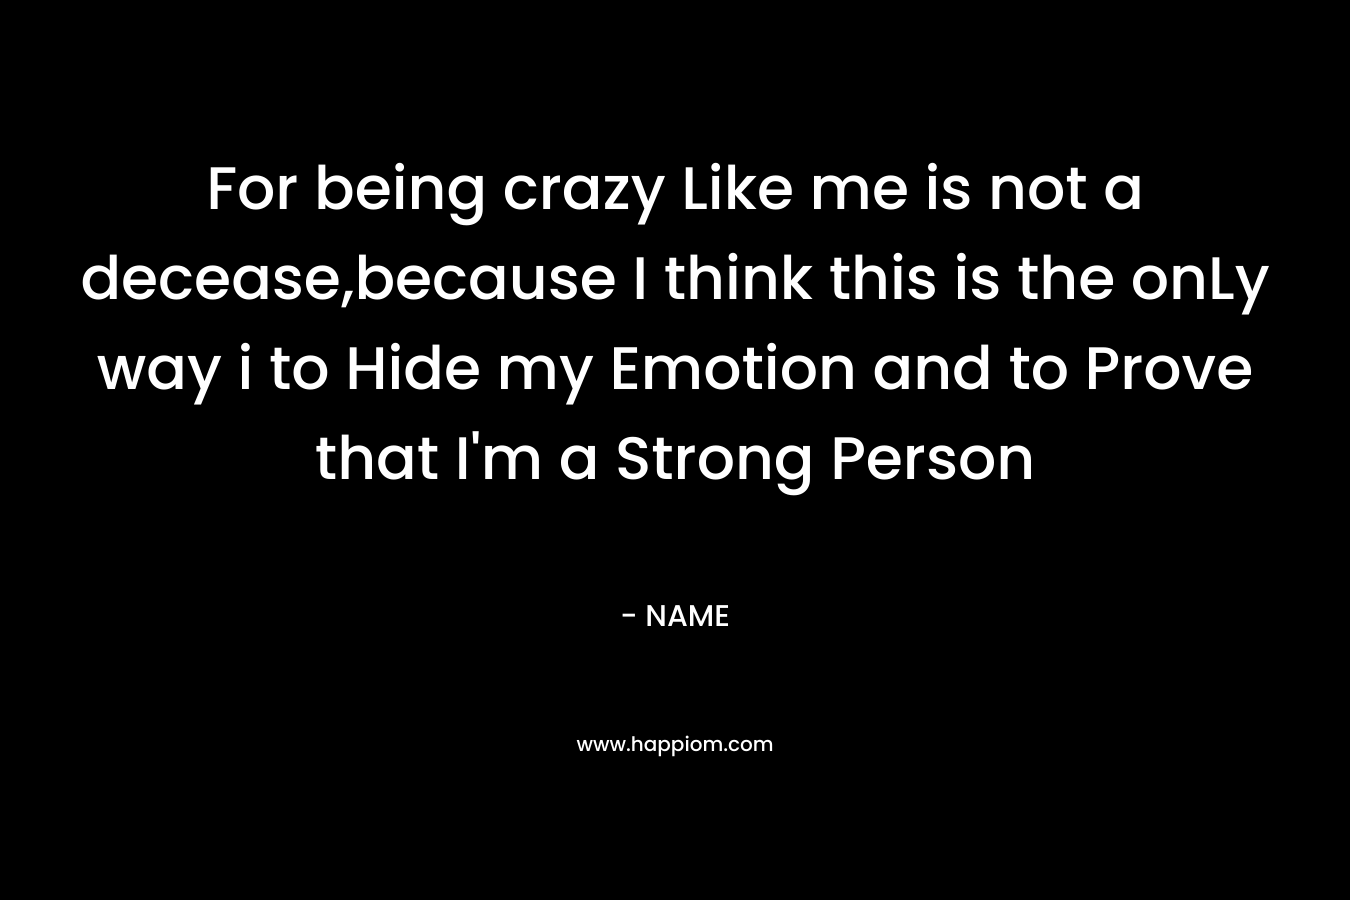 For being crazy Like me is not a decease,because I think this is the onLy way i to Hide my Emotion and to Prove that I'm a Strong Person